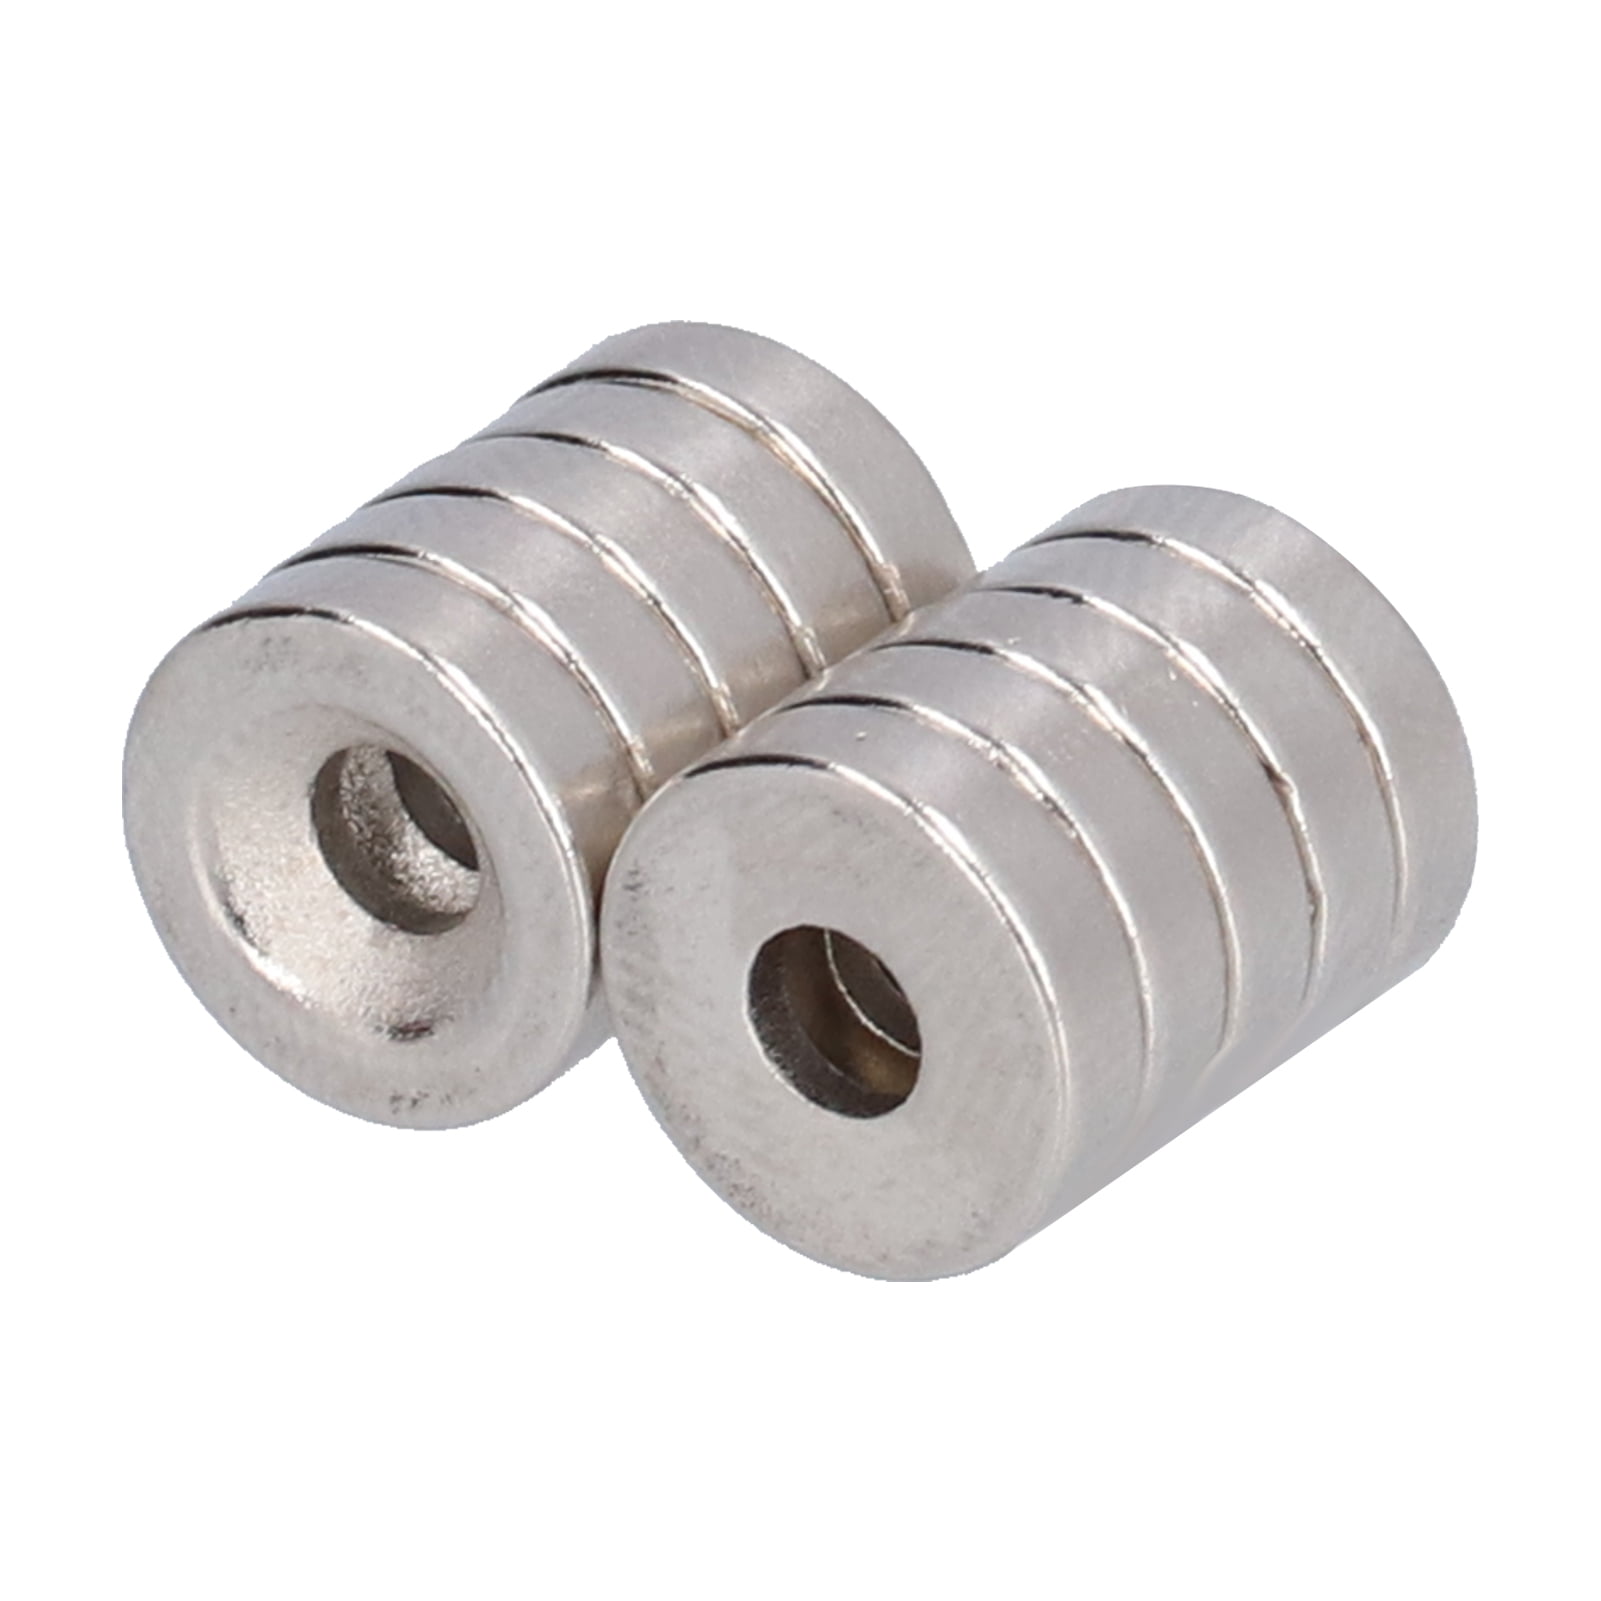 Lot Rare Earth DIY Industrial Strong Neodymium Magnet 20mm*10mm*4mm with Hole US 